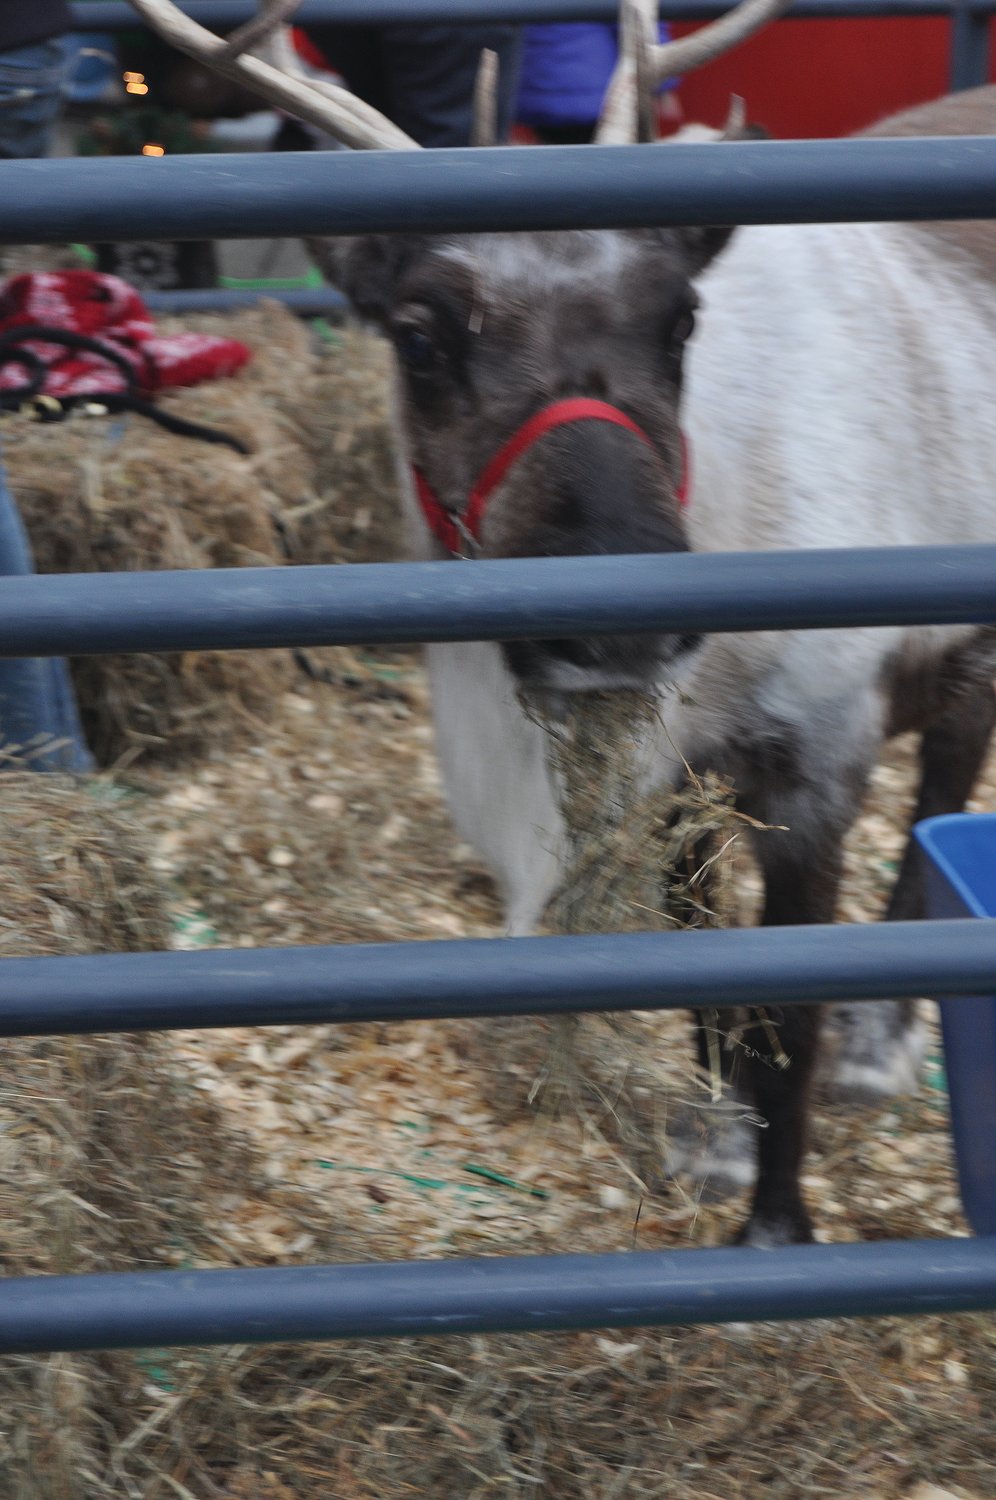 A reindeer eats straw at Brothers Pizza Company on Saturday.